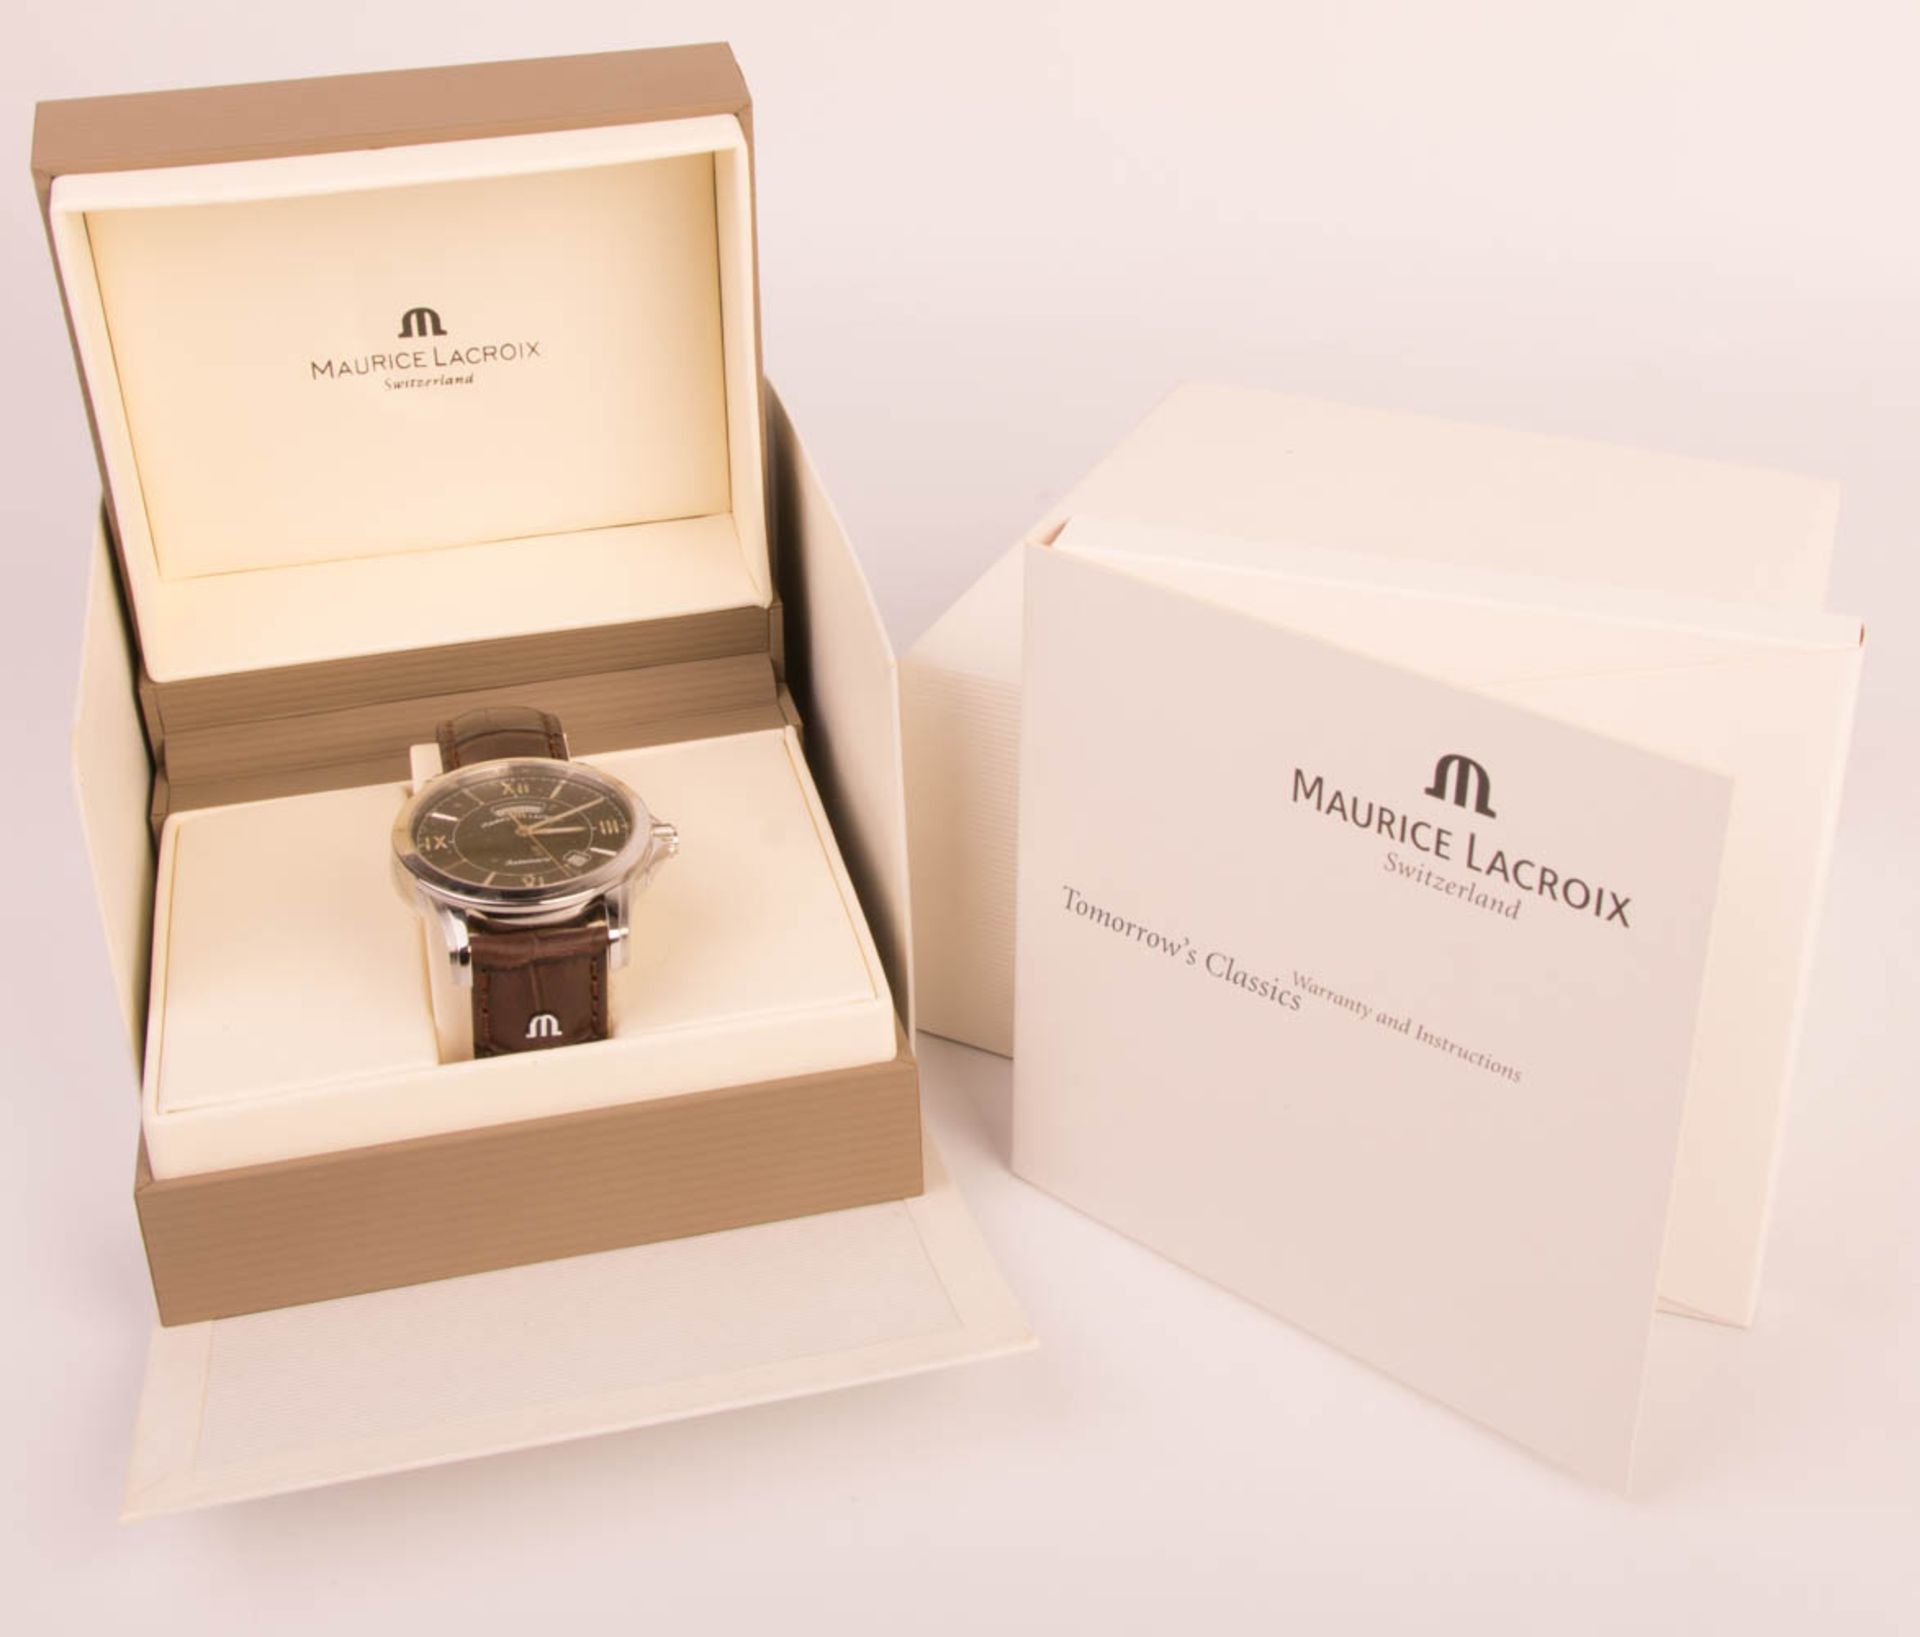 Maurice Lacroix men's wrist watch with box.